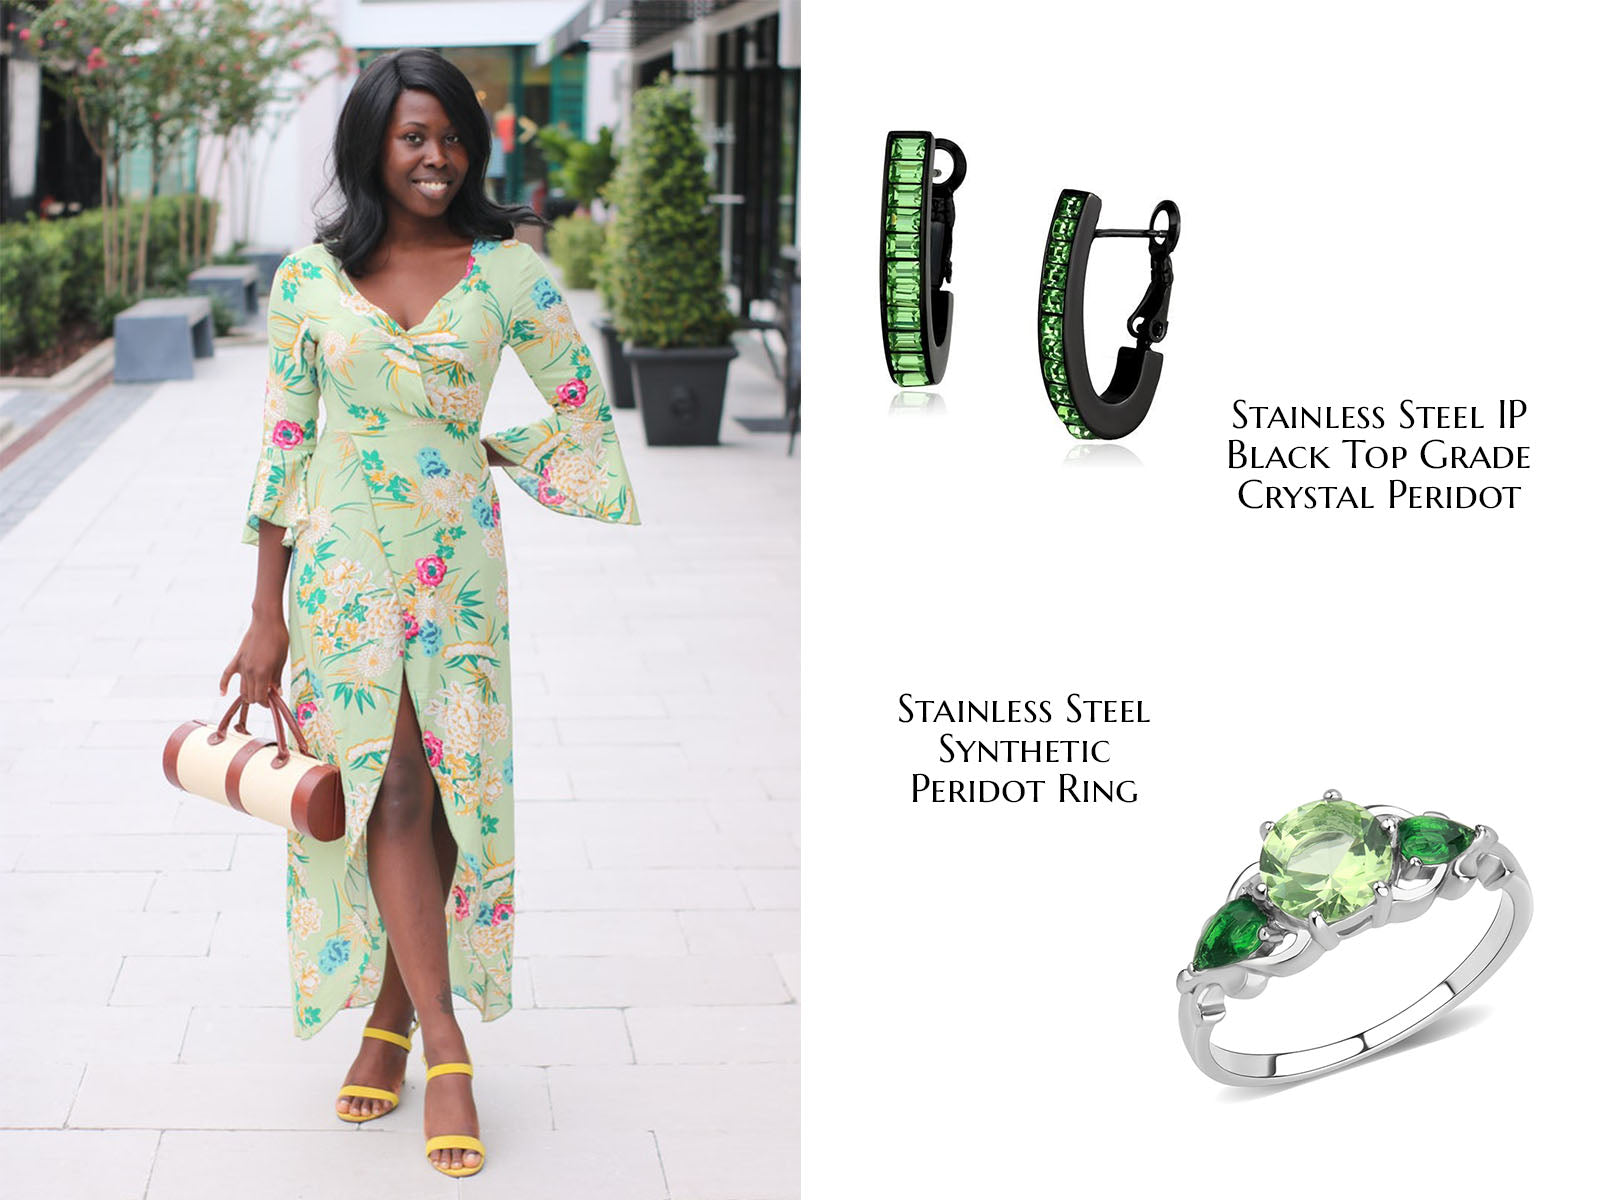 Woman wearing a green floral dress on one side of the photo and CeriJewelry's Stainless Steel IP Black Top Grade Crystal Peridot Earrings and Stainless Steel Synthetic Peridot Ring on the other side